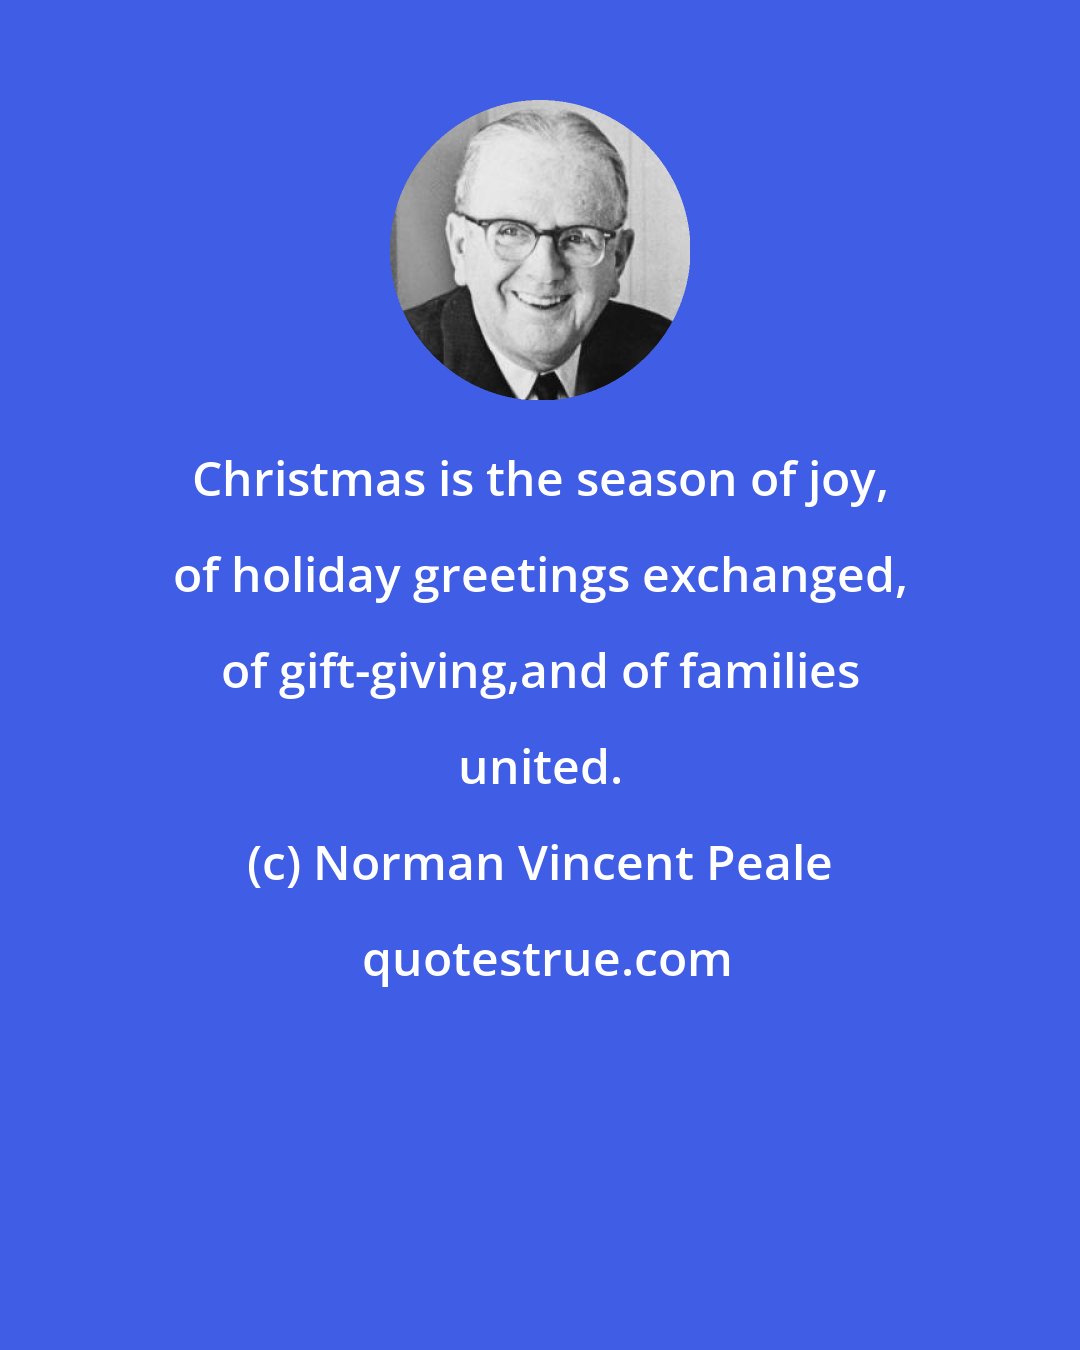 Norman Vincent Peale: Christmas is the season of joy, of holiday greetings exchanged, of gift-giving,and of families united.